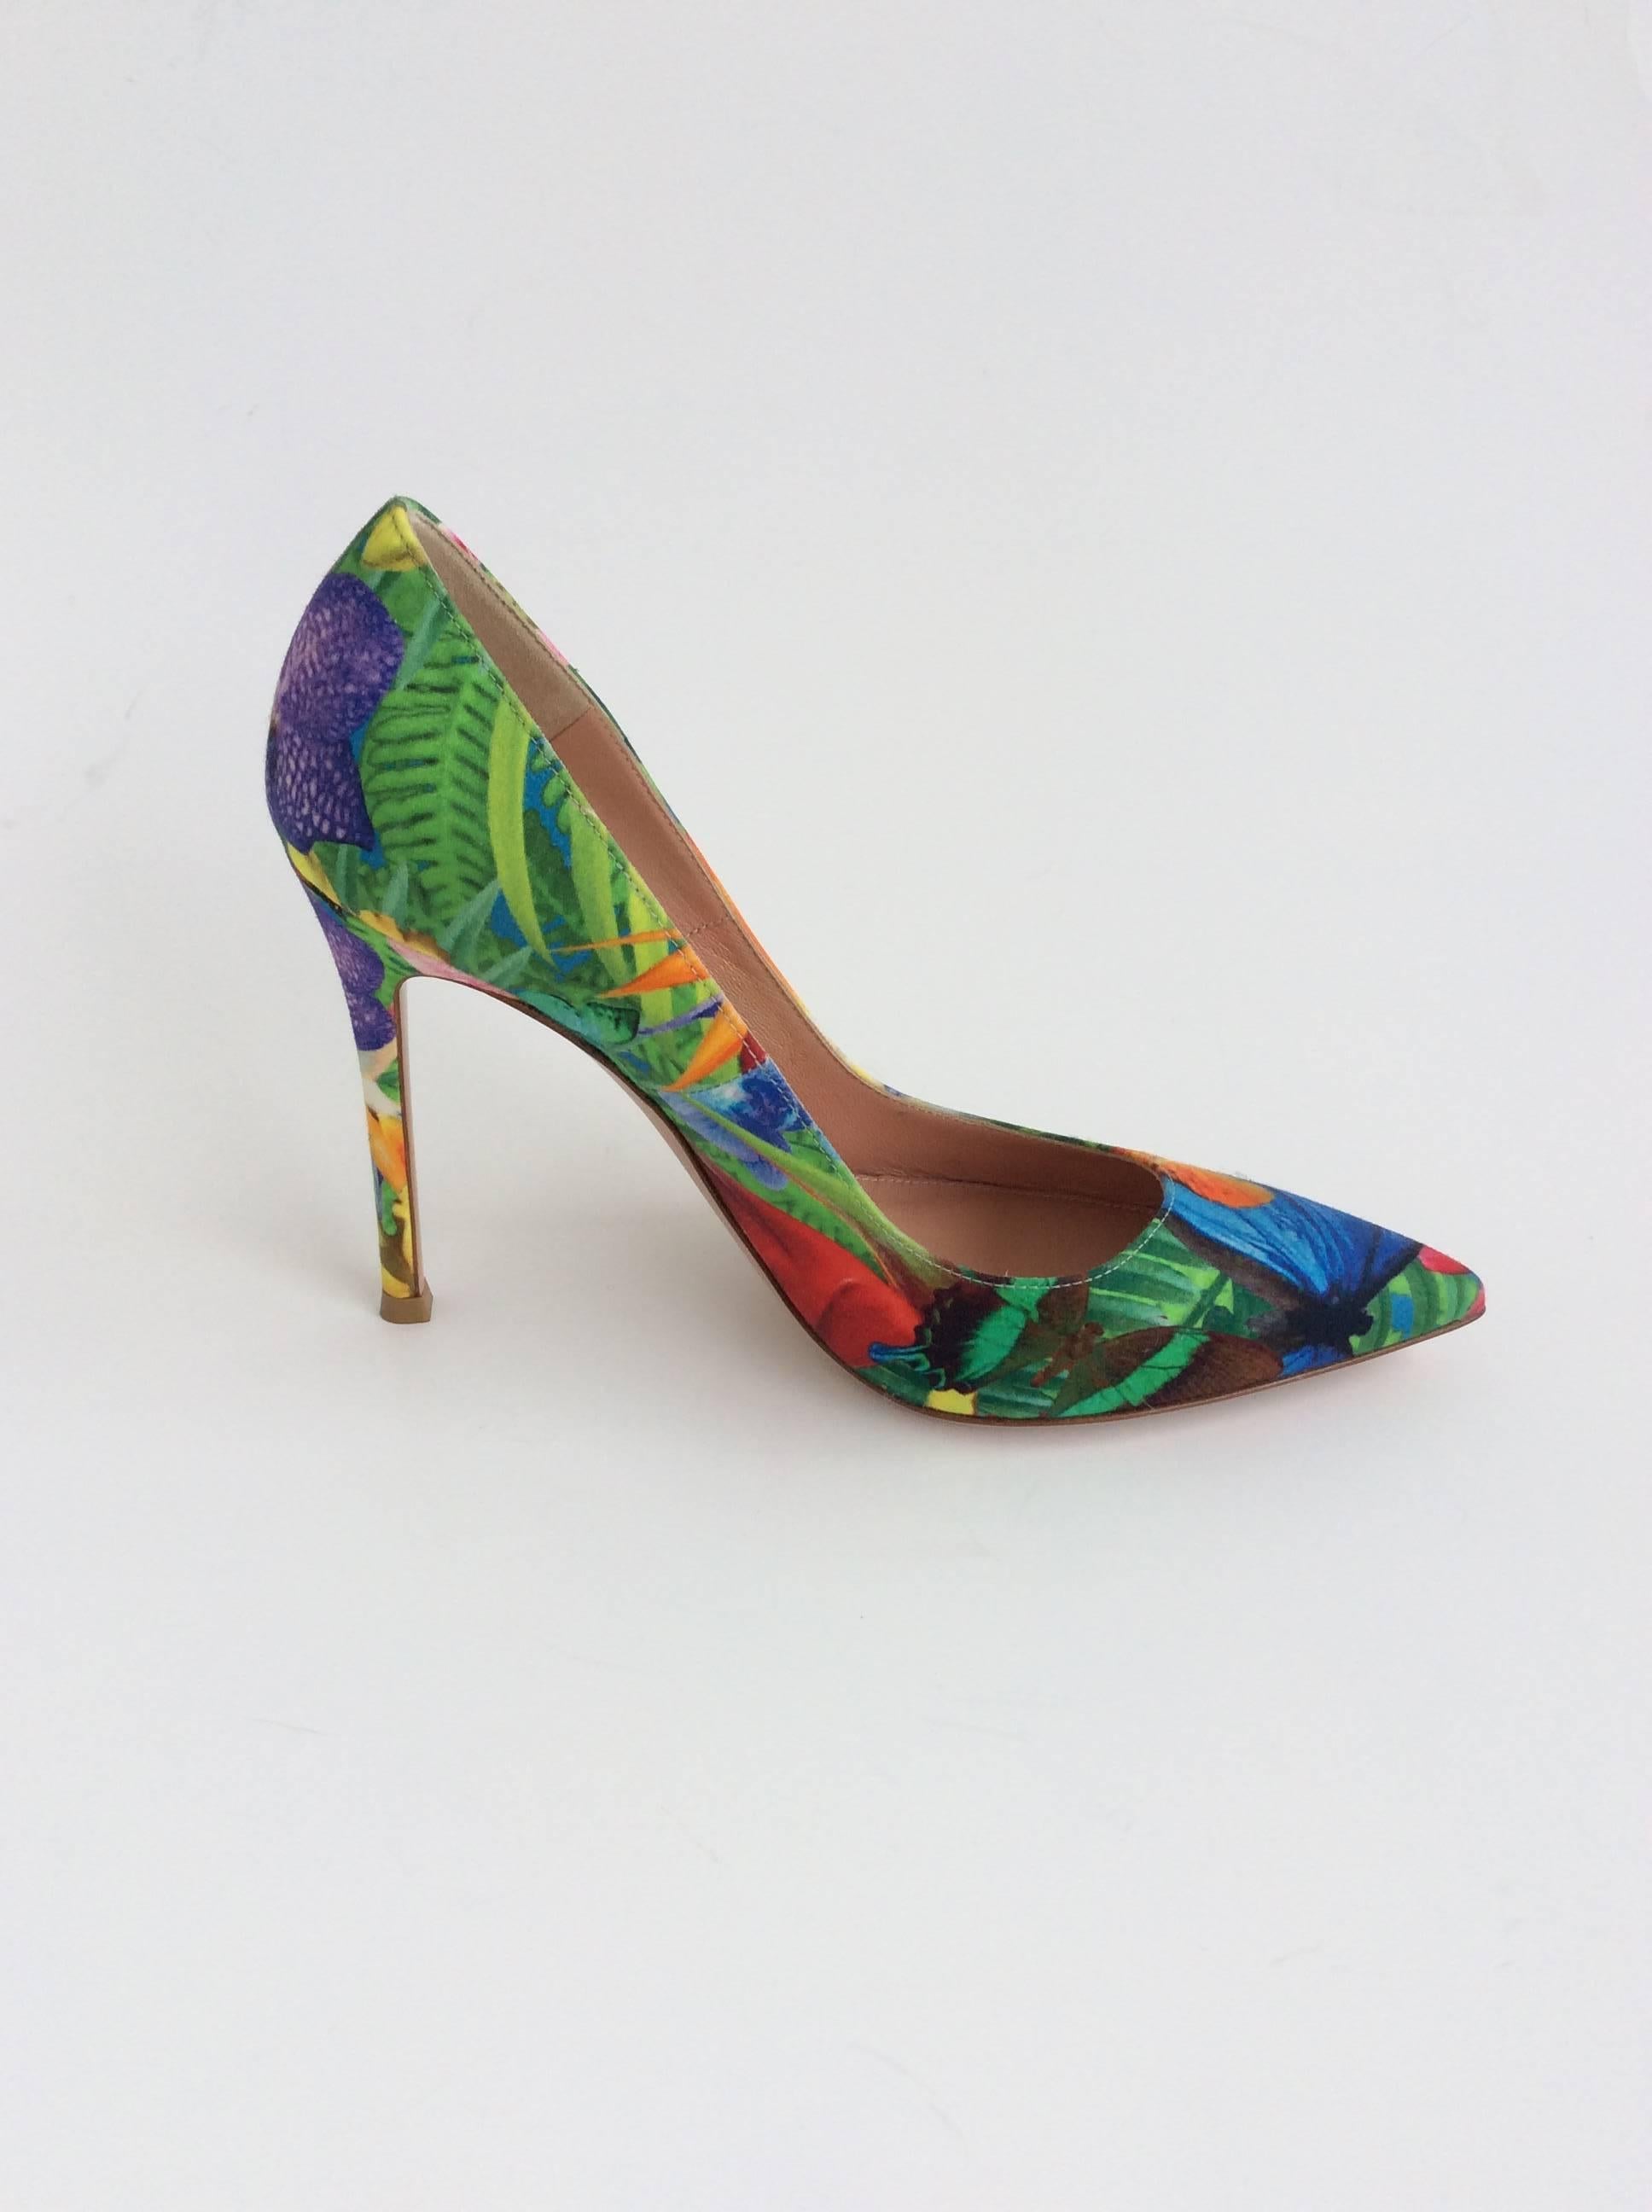 Bright multicolored Gianvito Rossi canvas pumps. Butterfly, floral, and tropical print throughout. Pointed toe and covered heel. 

Heel height: 4 inches

Sizing: 37, Us 7